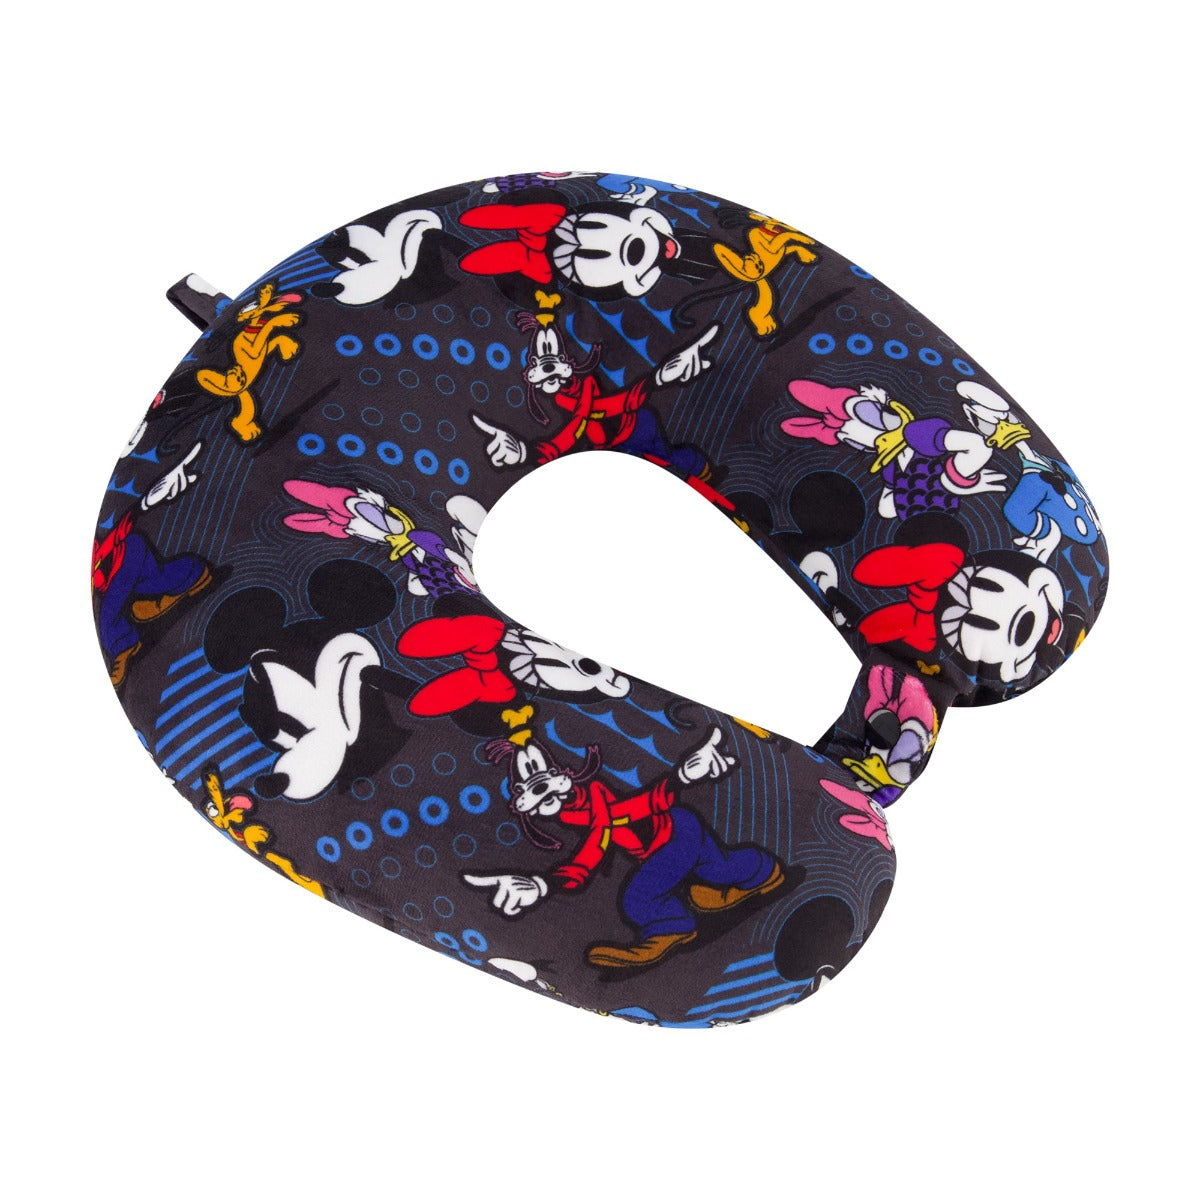 Ful Disney Mickey and friends neck pillow black blue - comfortable kids travel neck pillows 